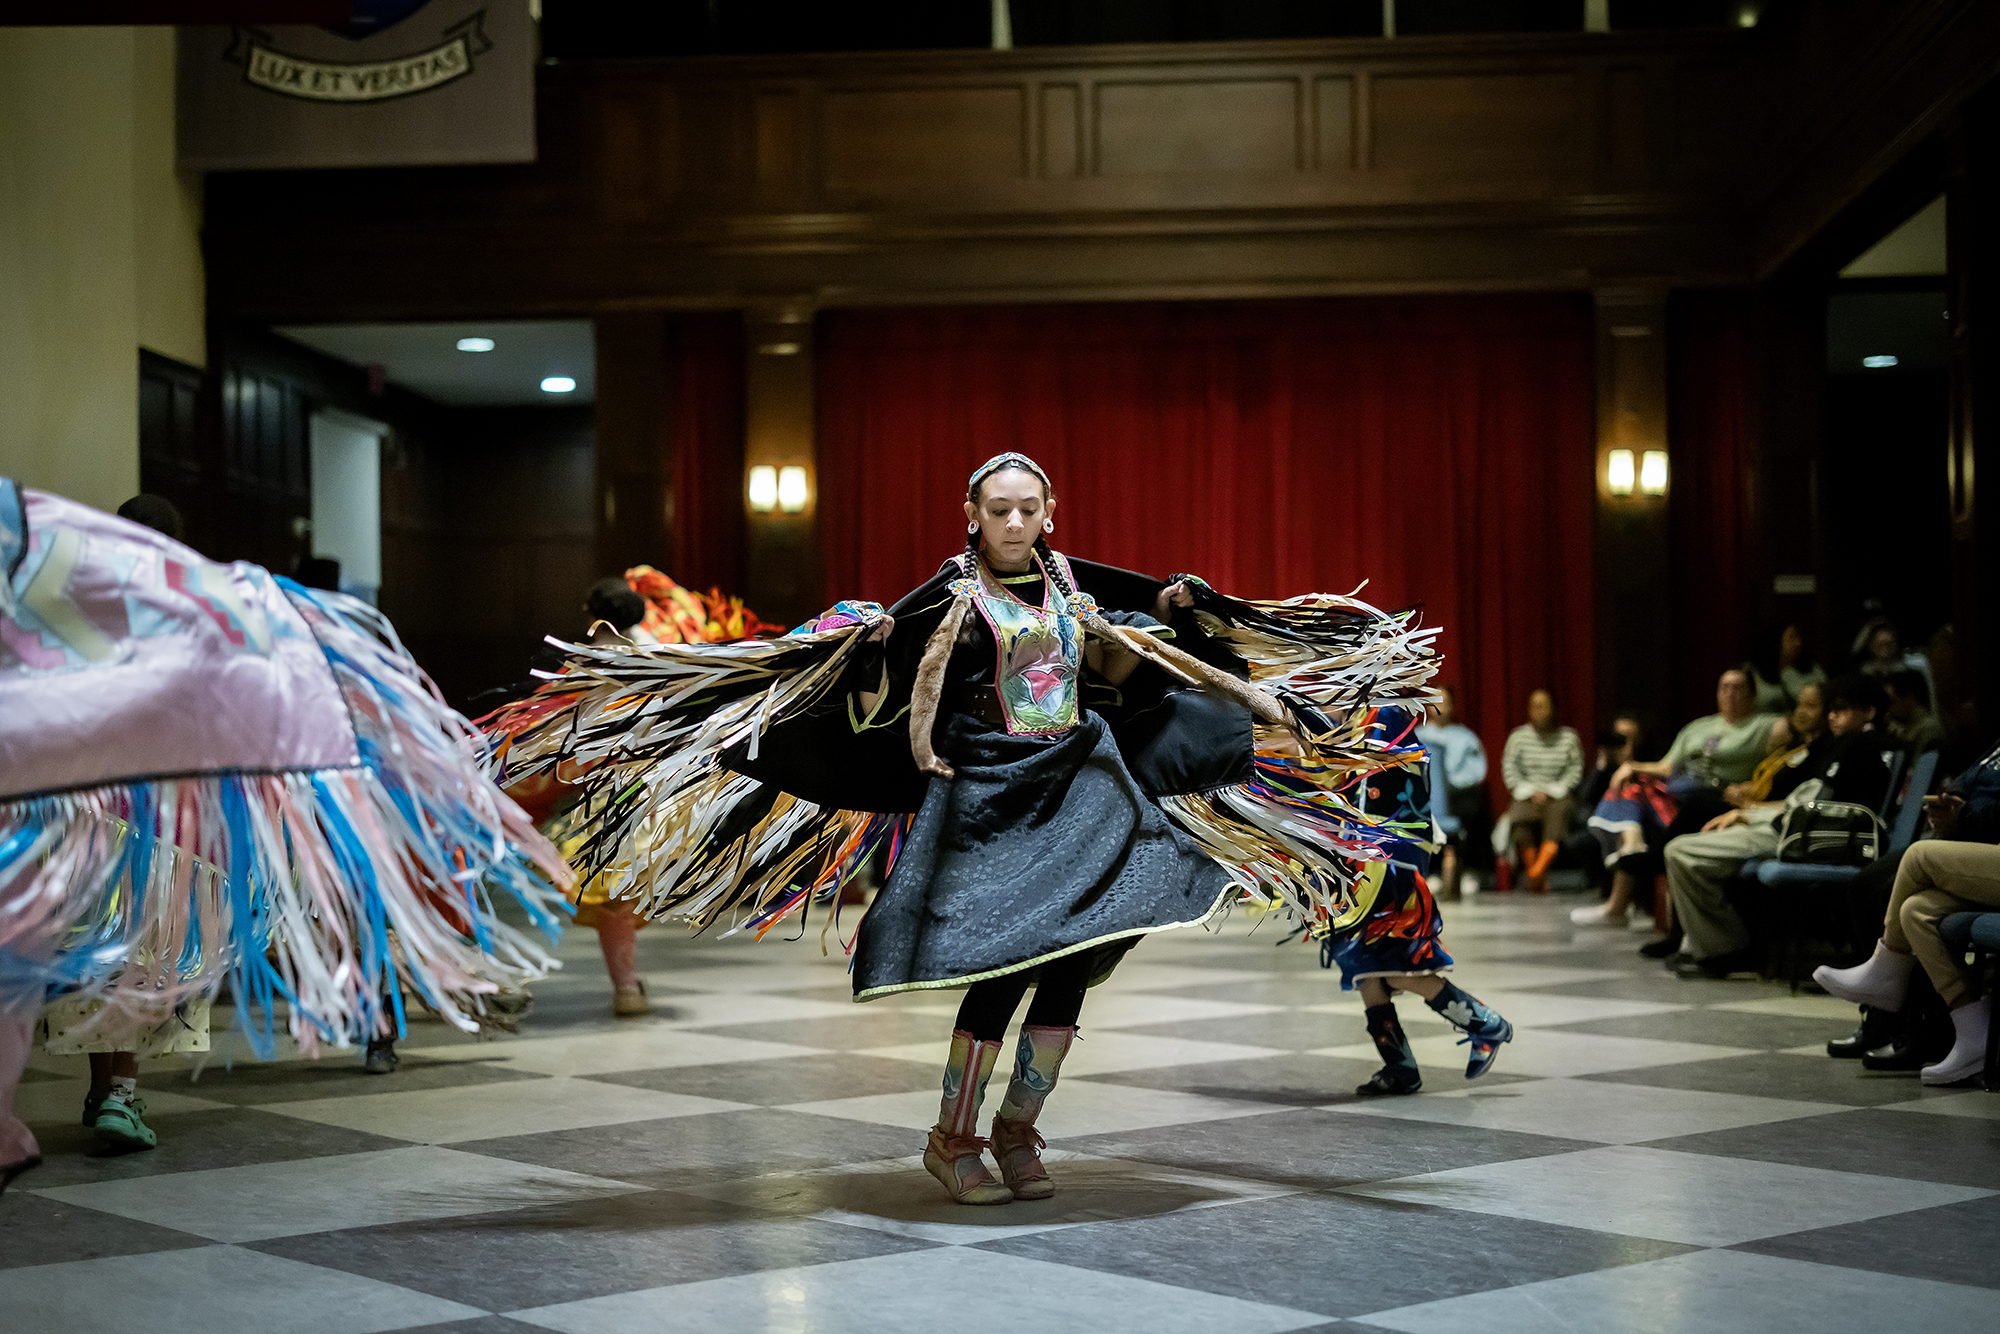 A young woman dances in the center of the hall of flags, with swirling fringed shawls around her.